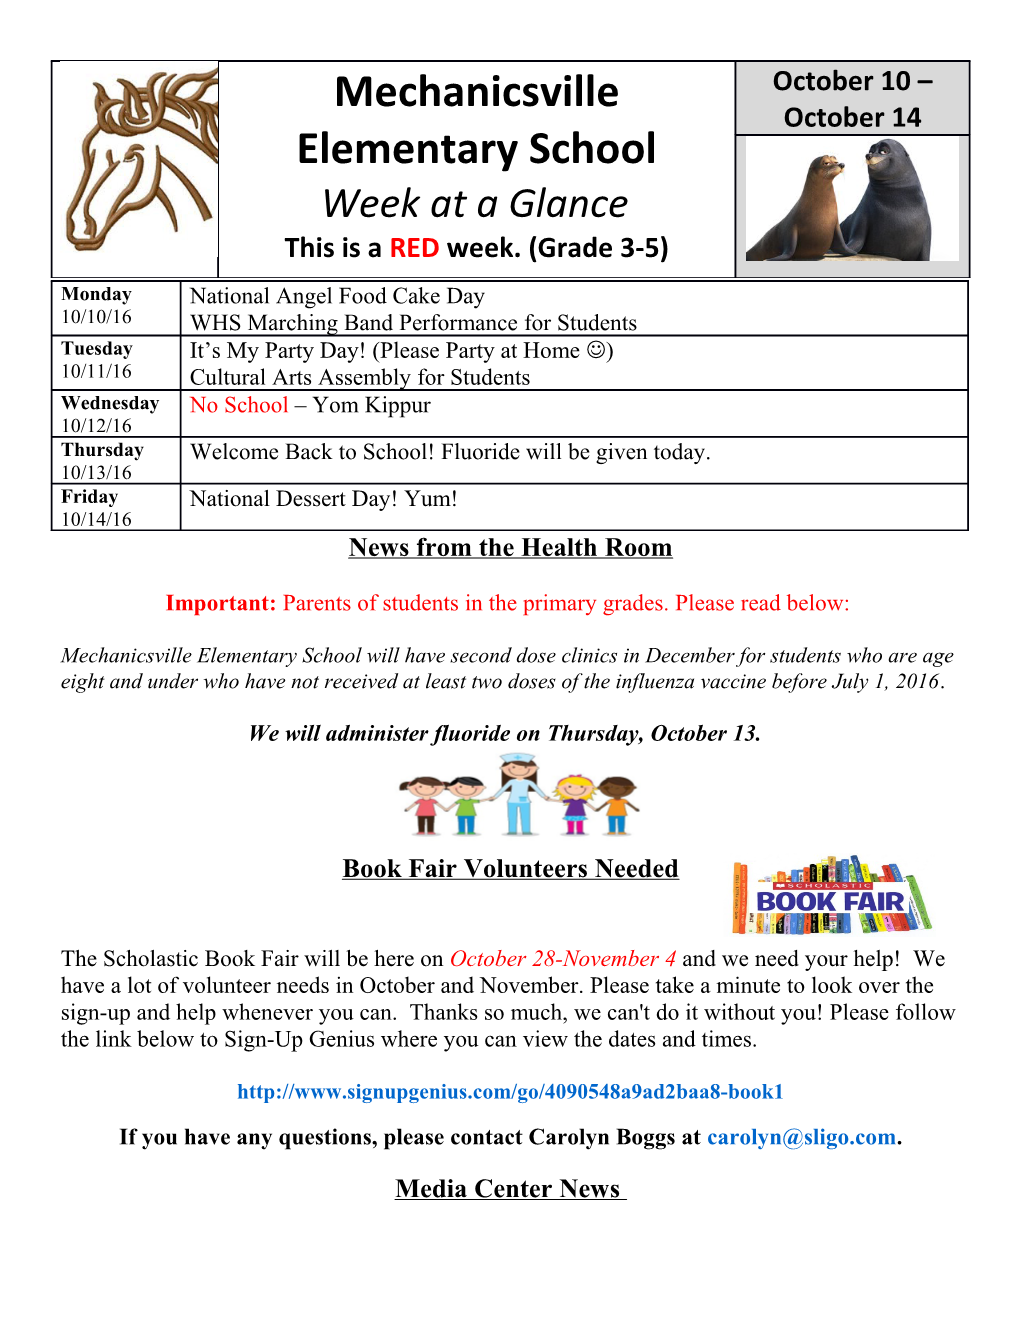 Mechanicsville Elementary School Week at a Glance This Is a RED Week. (Grade 3-5)